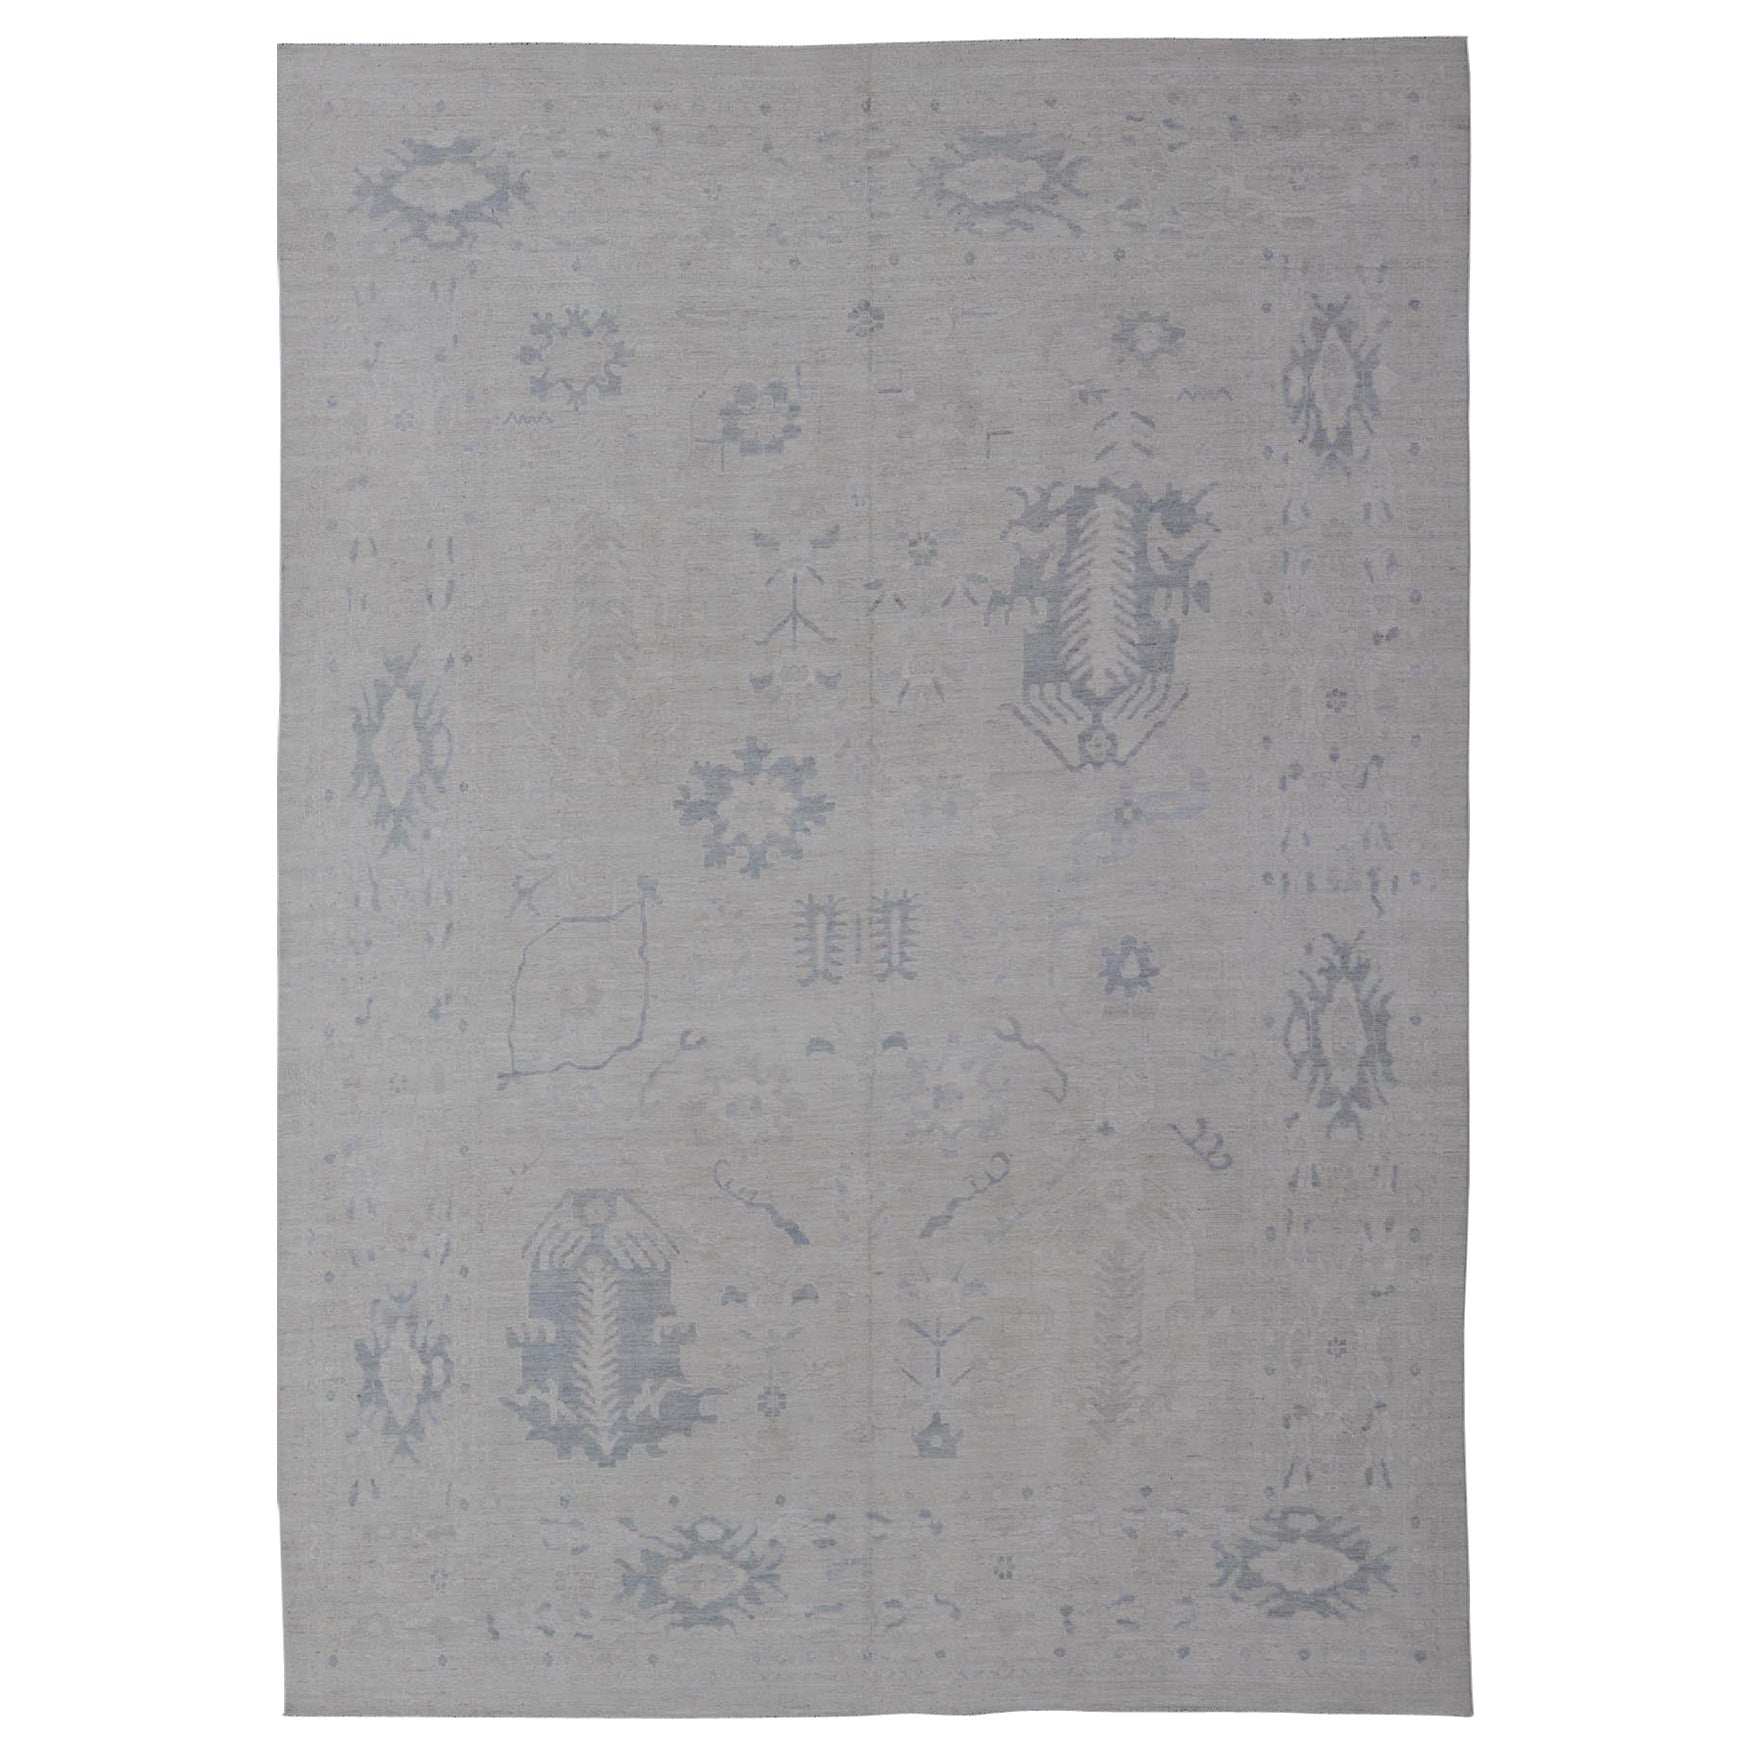 Large Modern Oushak Rug with All-Over Floral Motifs in Neutrals & Soft Colors